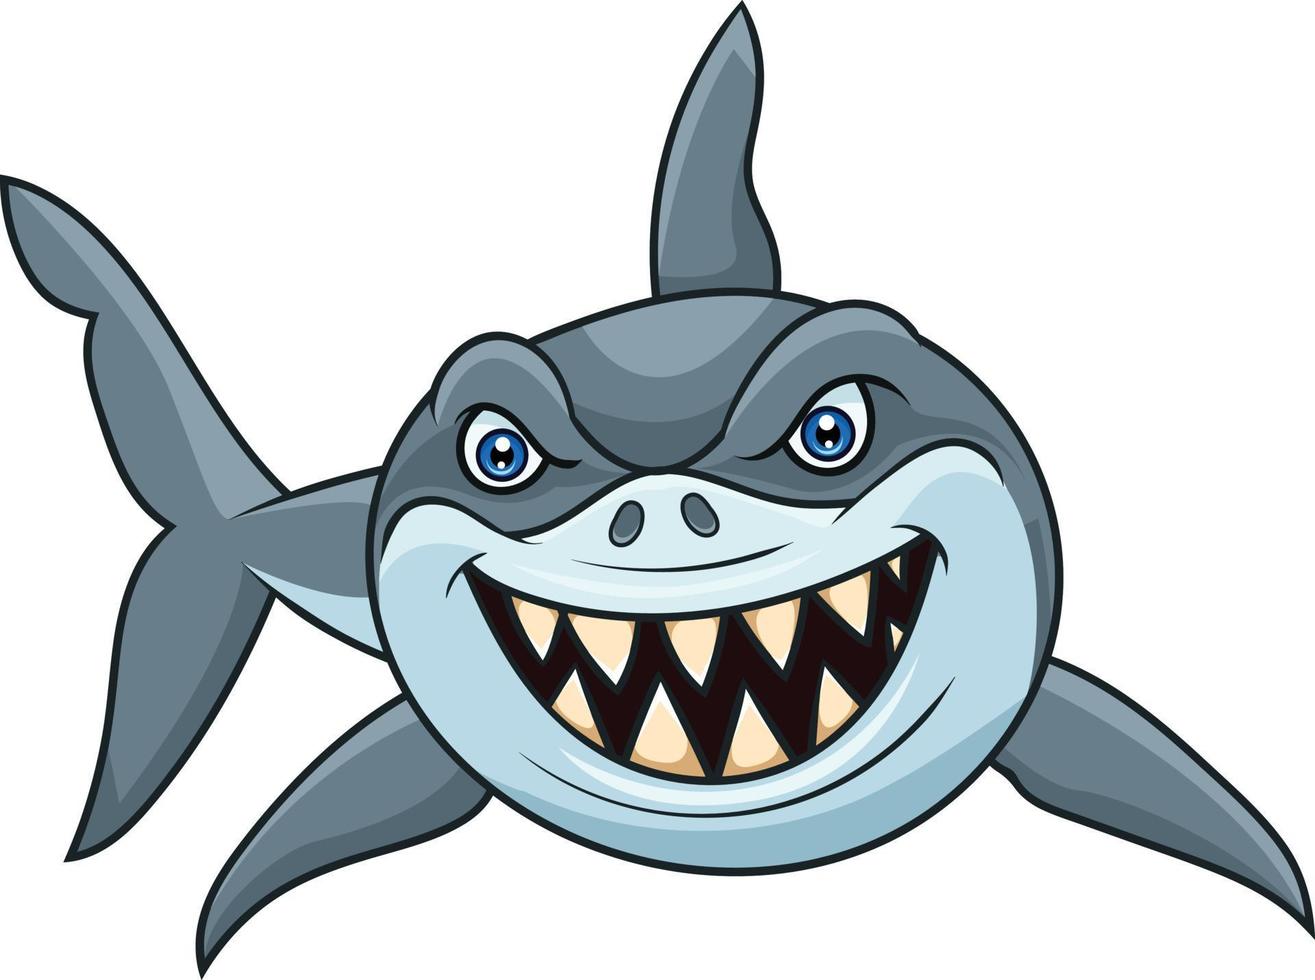 Cartoon angry shark isolated on white background vector